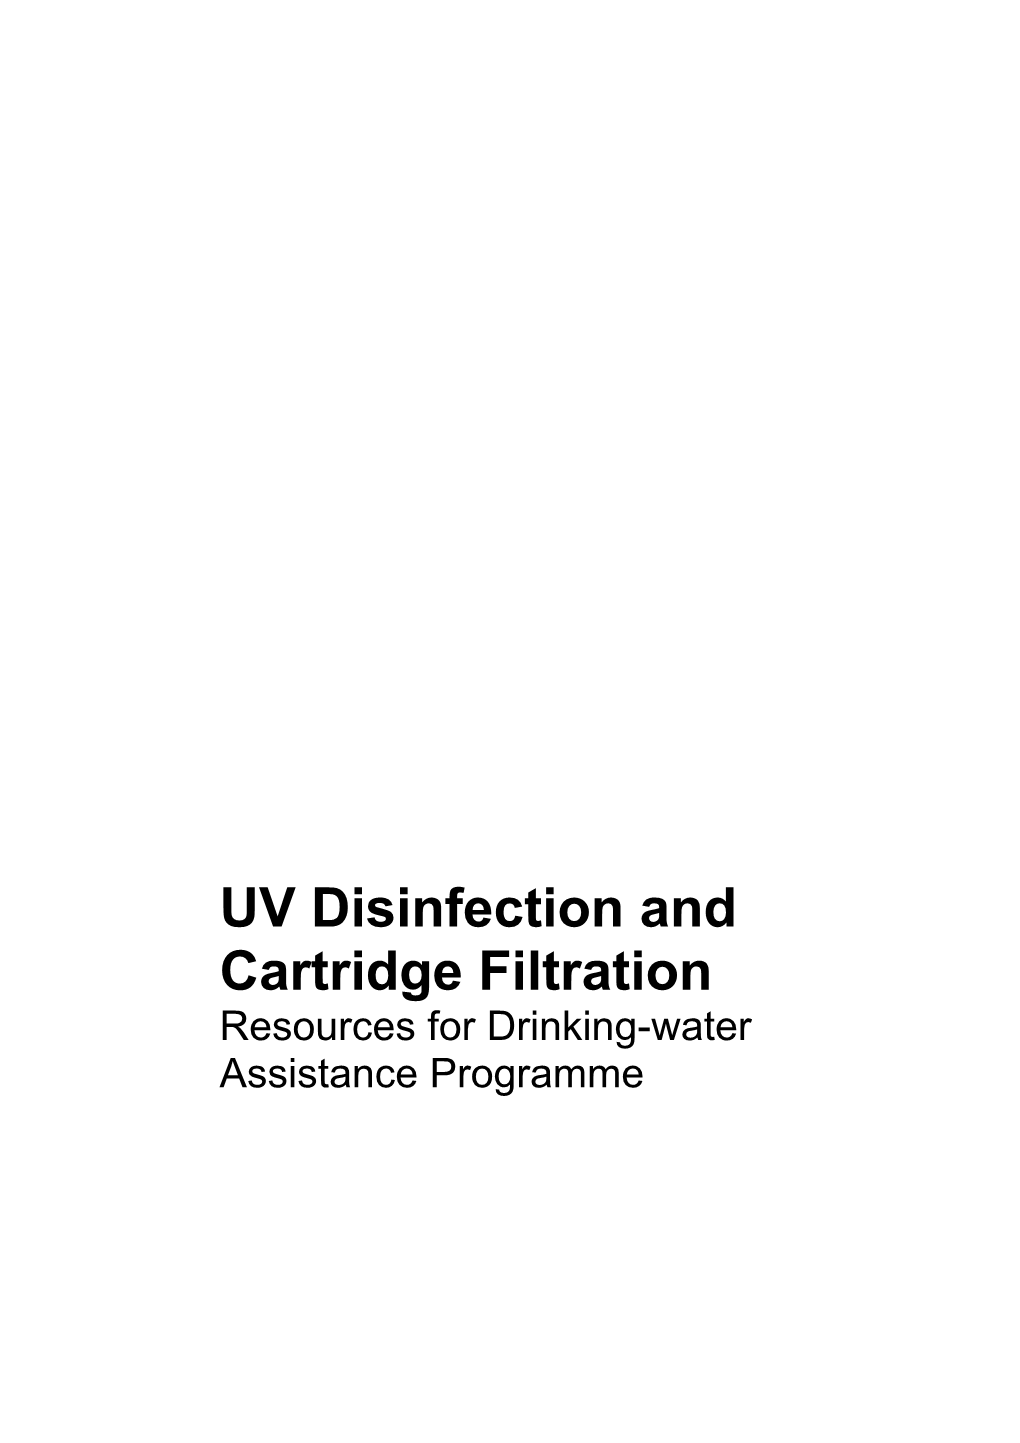 UV Disinfection and Cartridge Filtration: Resources for Drinking-Water Assistance Programme